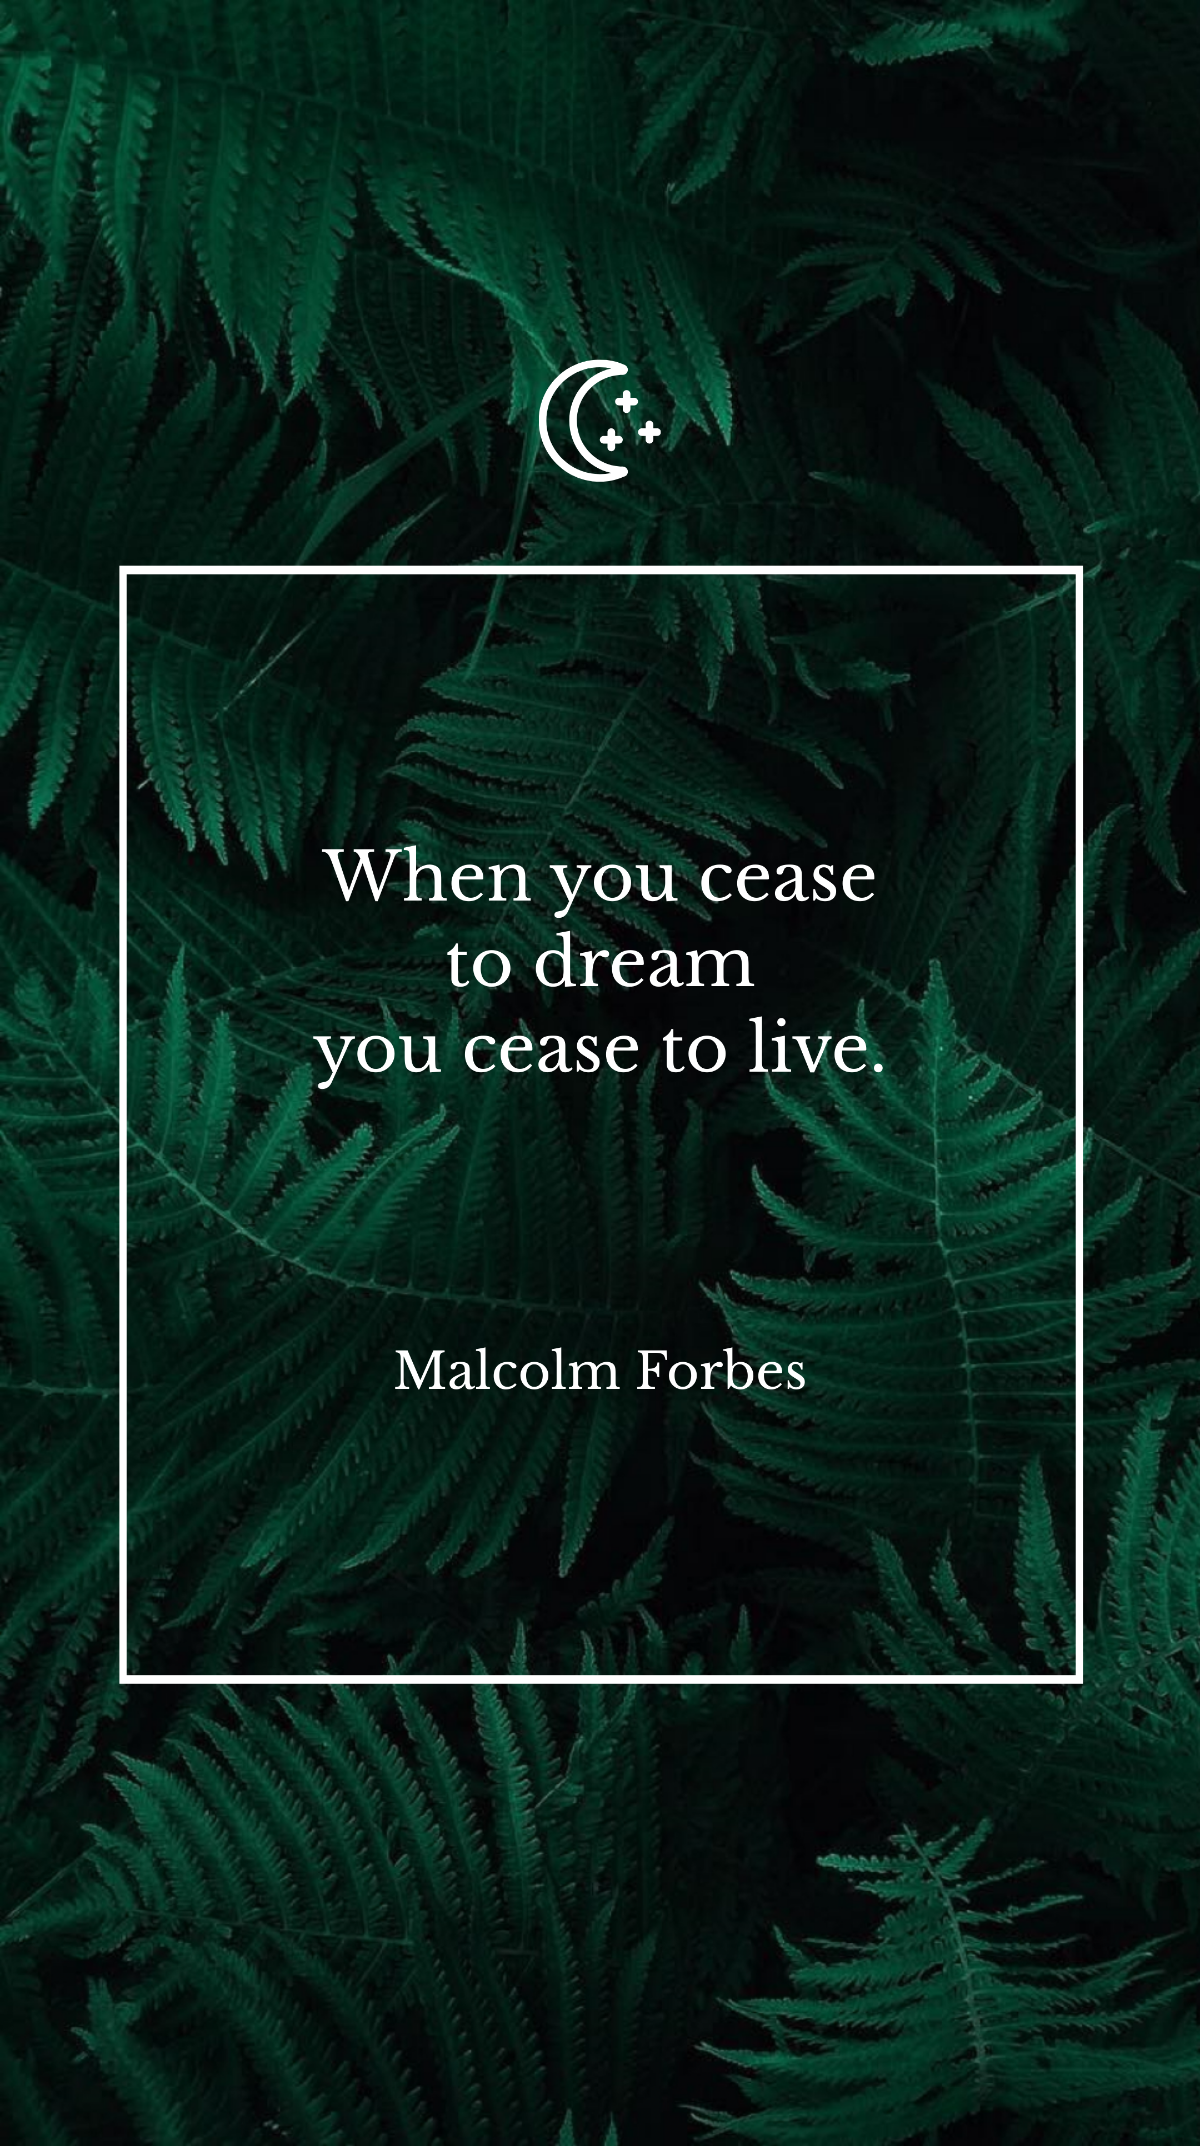 Malcolm Forbes - When you cease to dream you cease to live Template